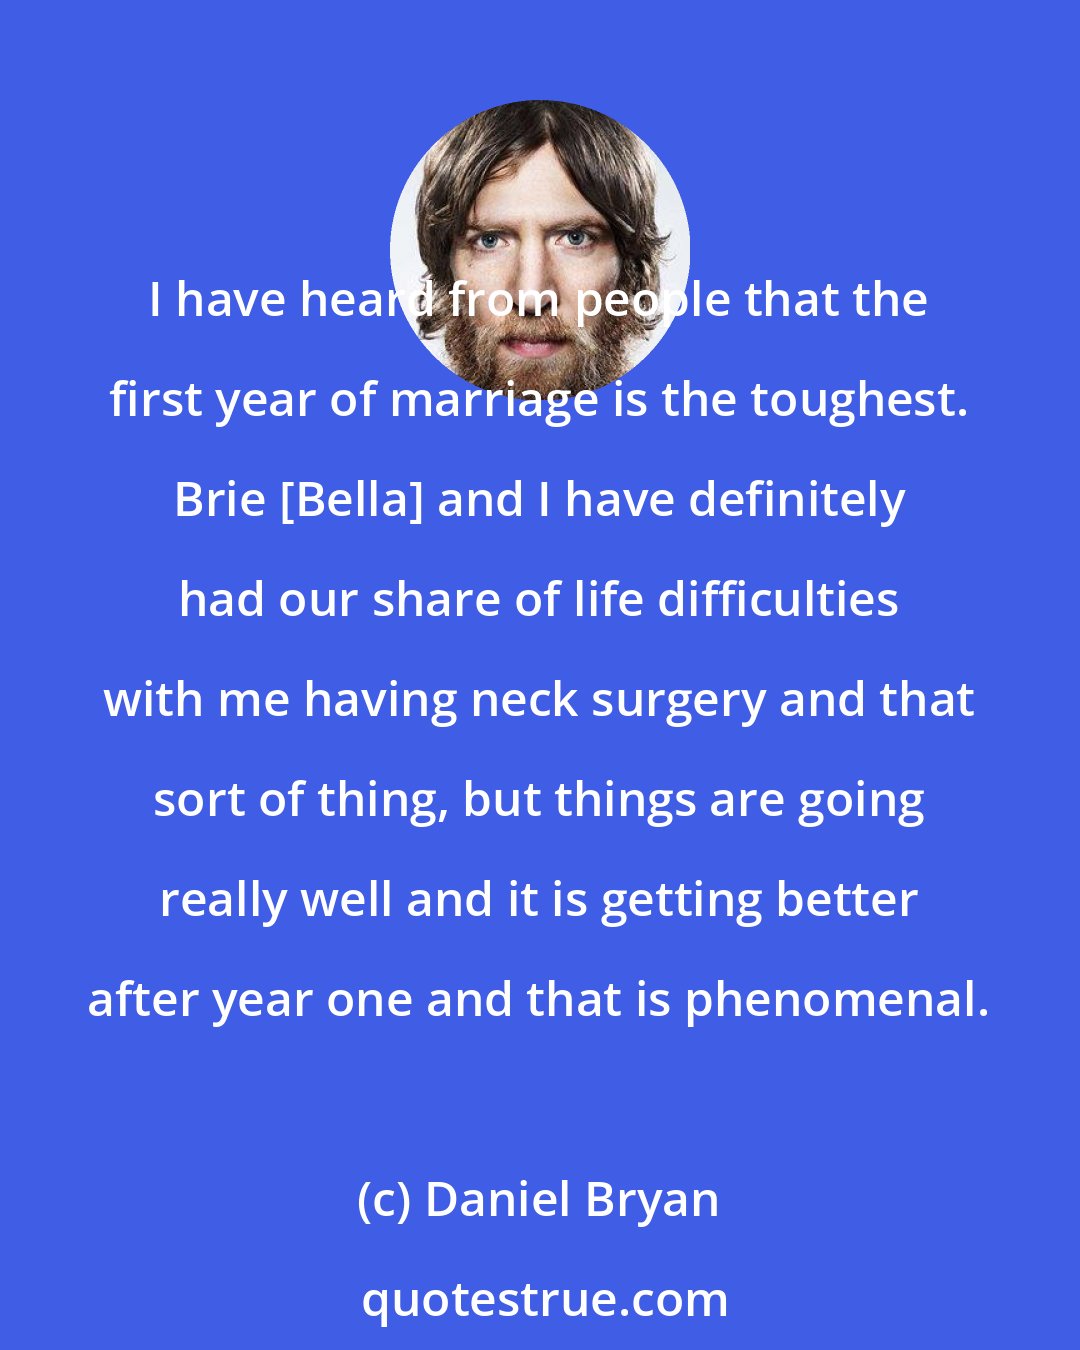 Daniel Bryan: I have heard from people that the first year of marriage is the toughest. Brie [Bella] and I have definitely had our share of life difficulties with me having neck surgery and that sort of thing, but things are going really well and it is getting better after year one and that is phenomenal.